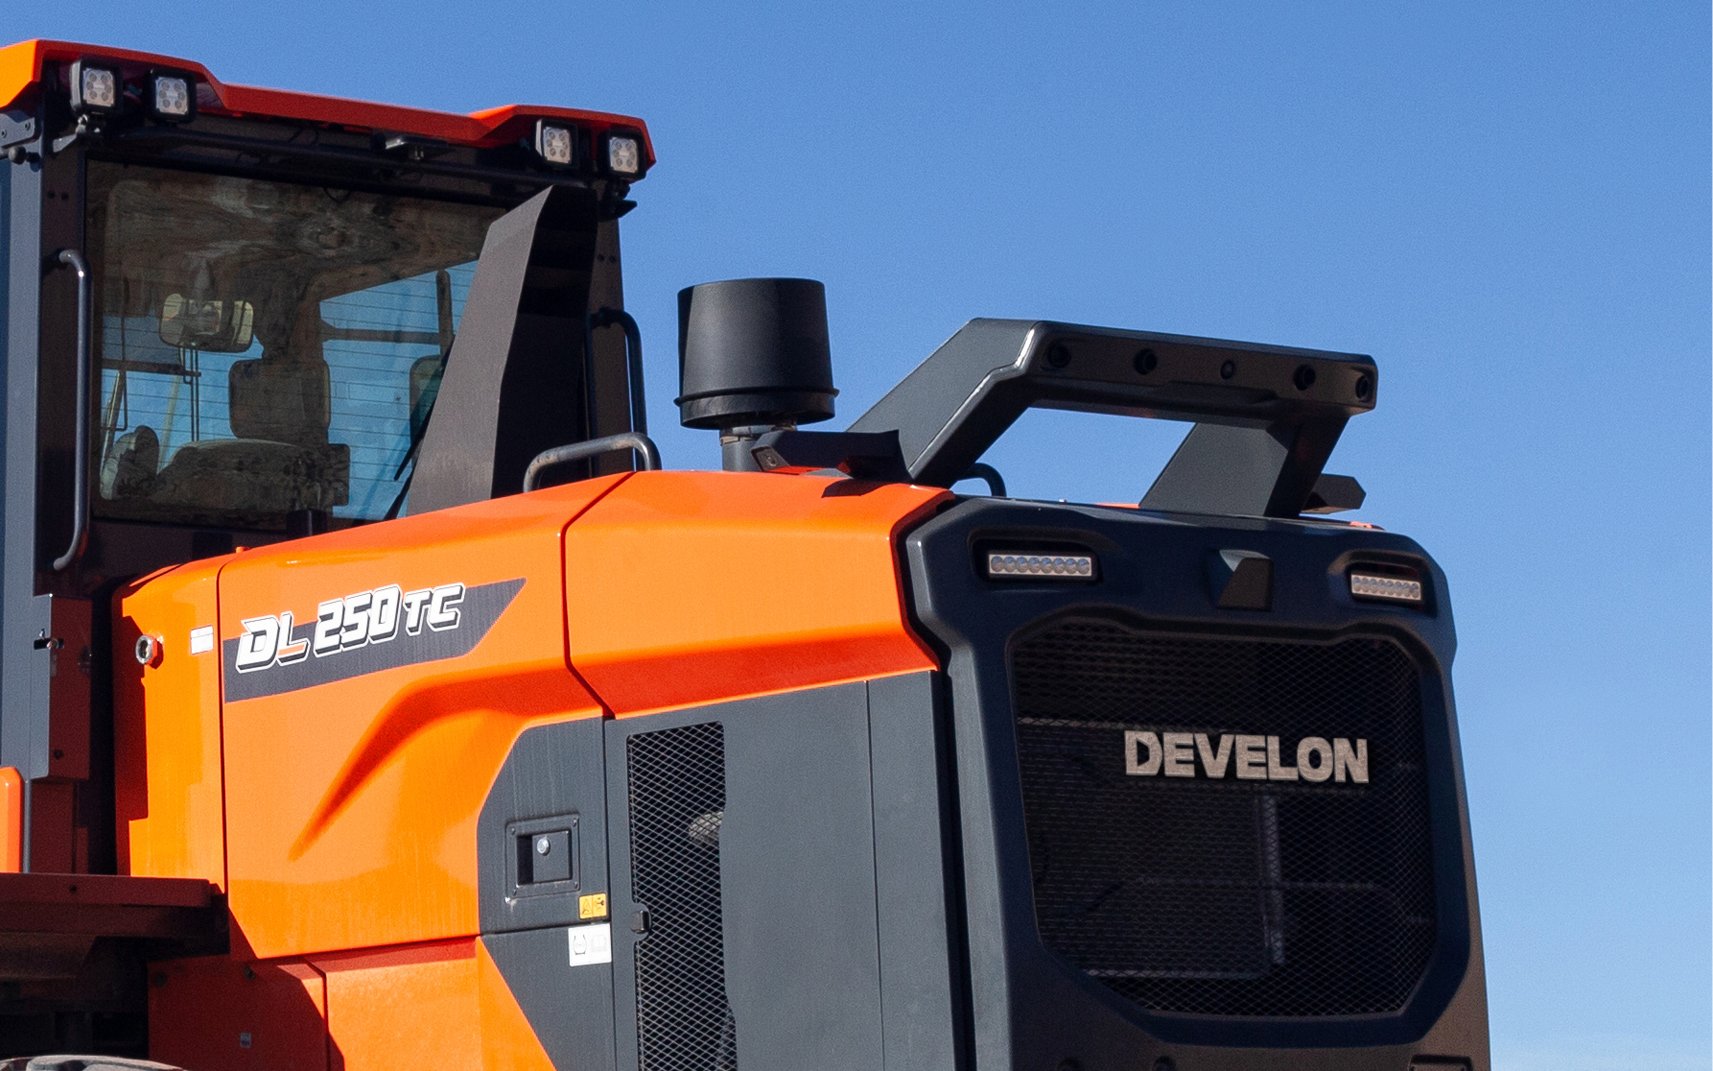 The around view monitor camera system safety feature is shown on a DL250TC-7 wheel loader.